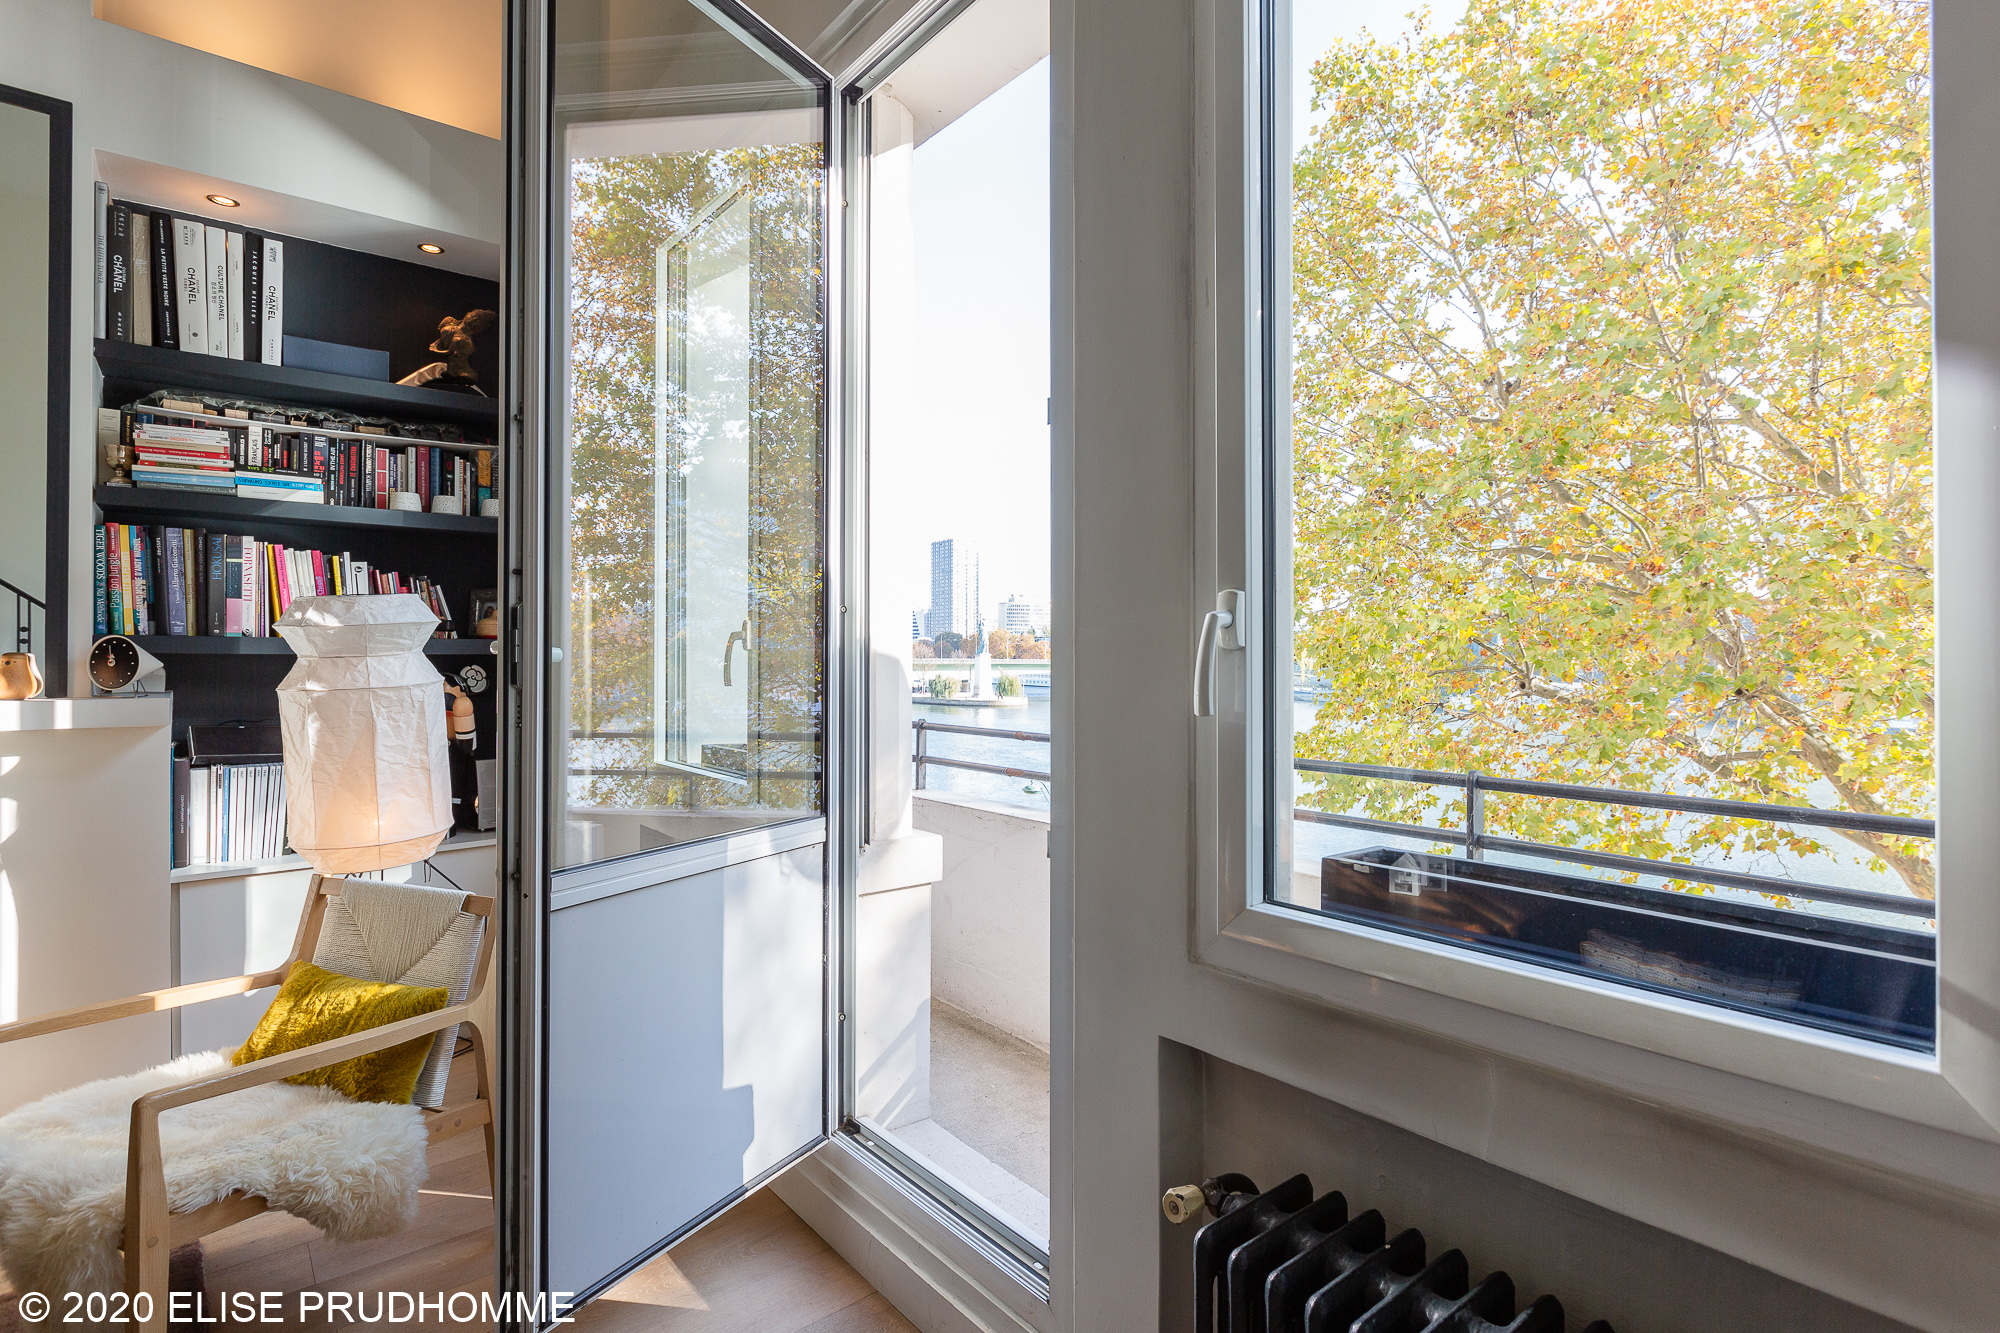 Access to the balcony with Tour Eiffel view